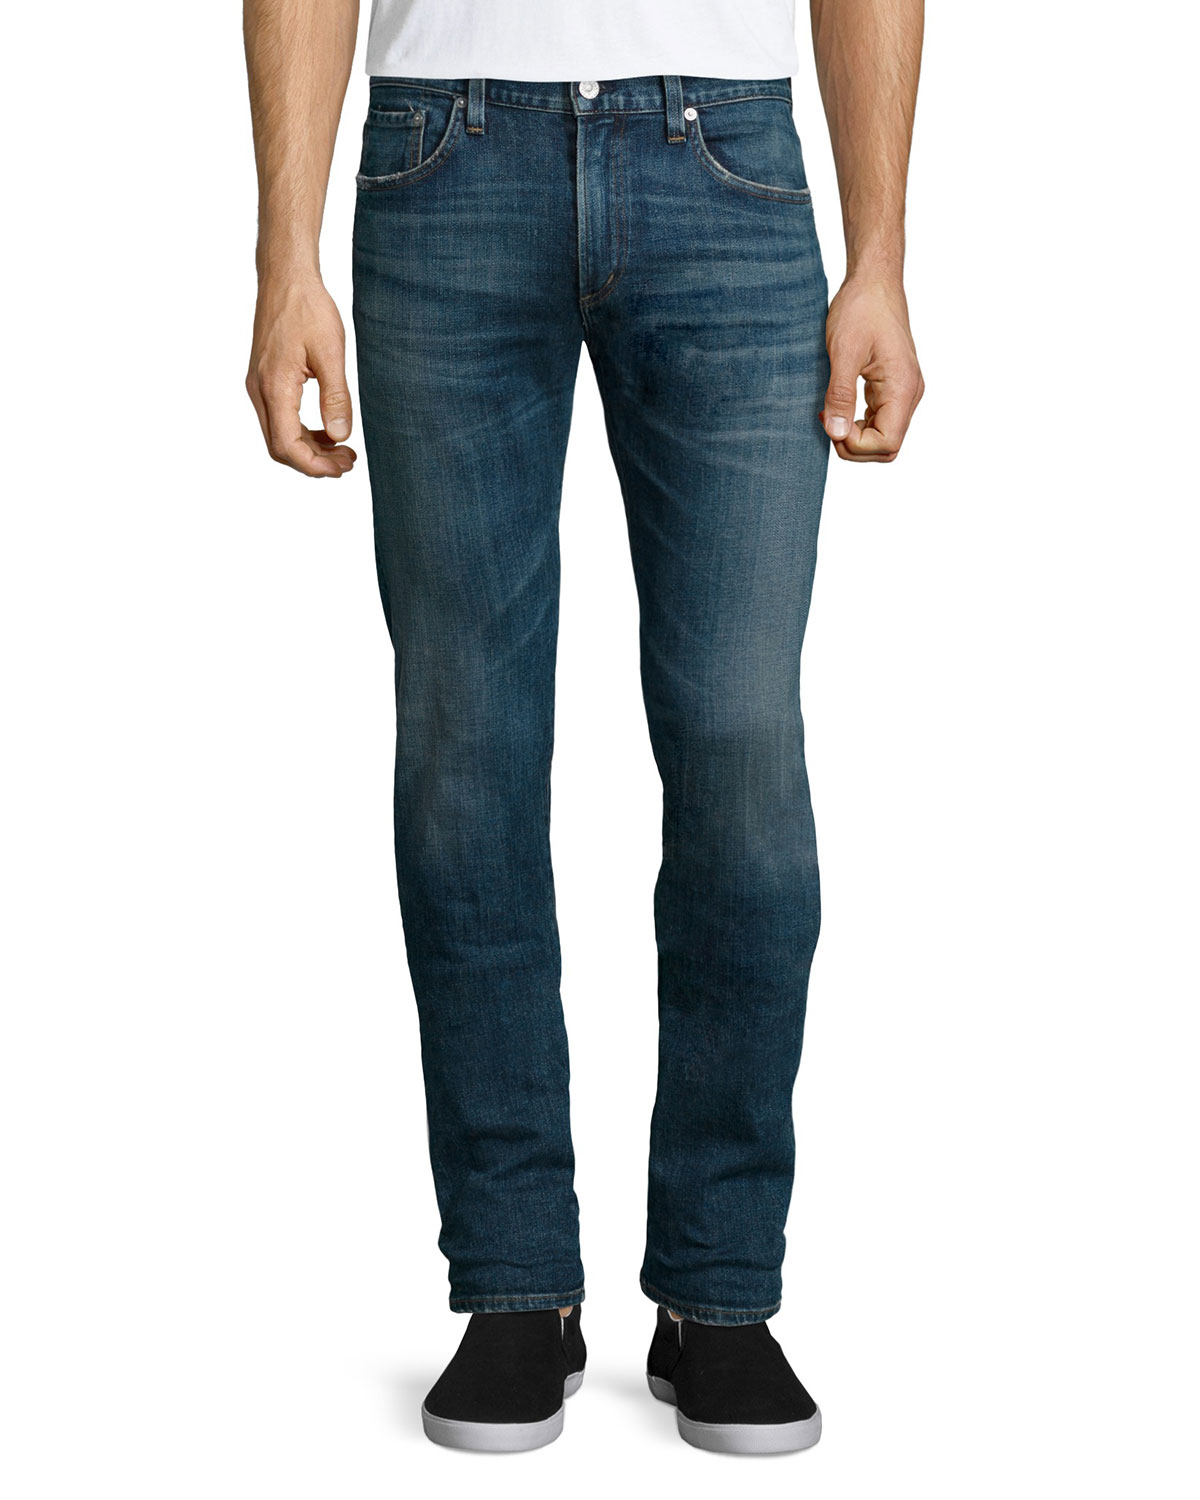 Lyst - Citizens of Humanity Core Slim Straight Morrison Jeans in Blue ...